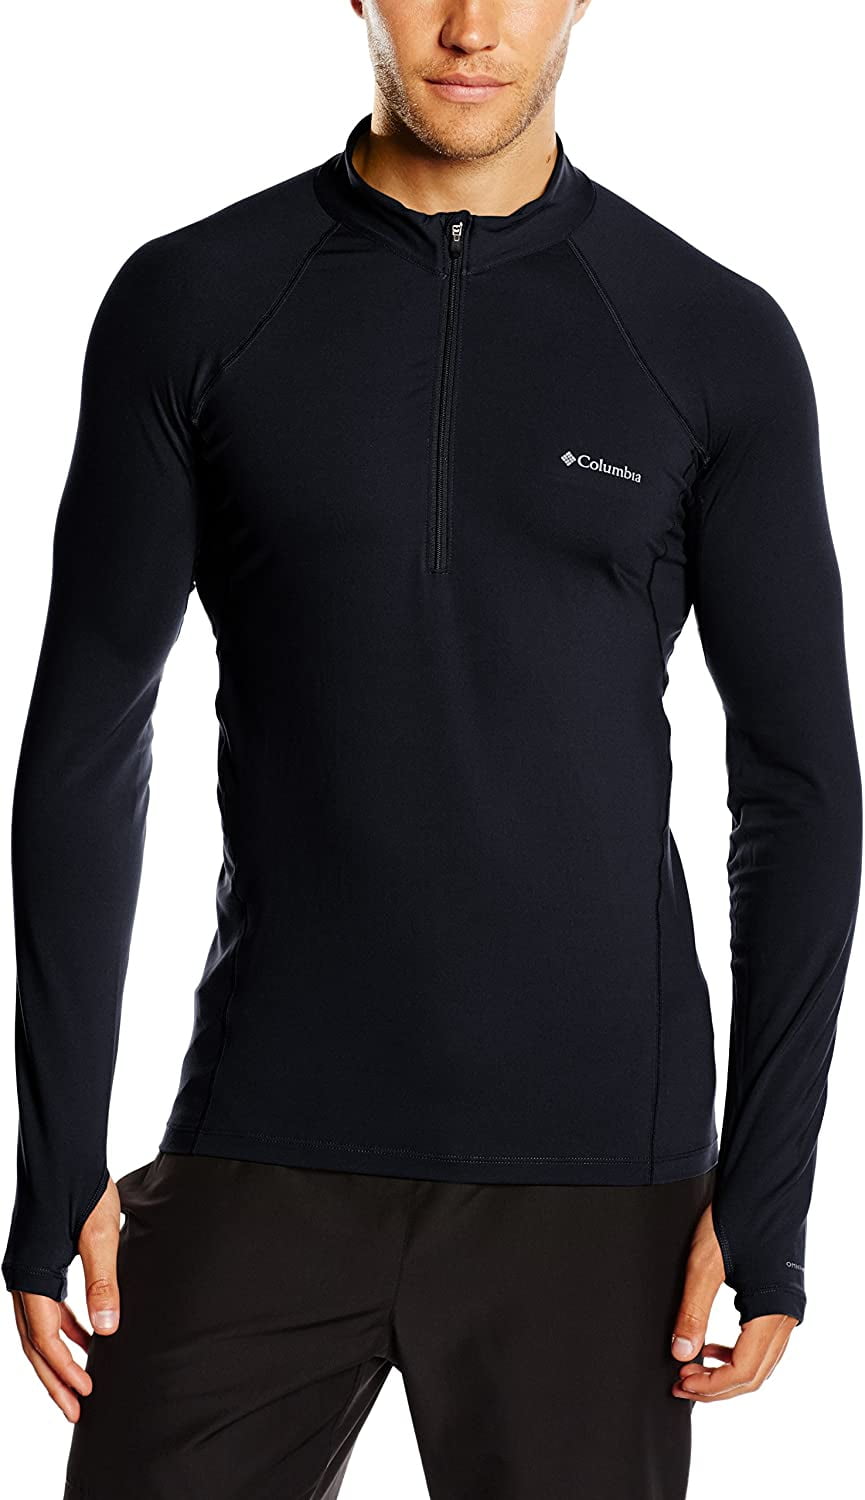 Columbia Mens Midweight Stretch Long Sleeve Half Zip Base Layer RRP £55.00 